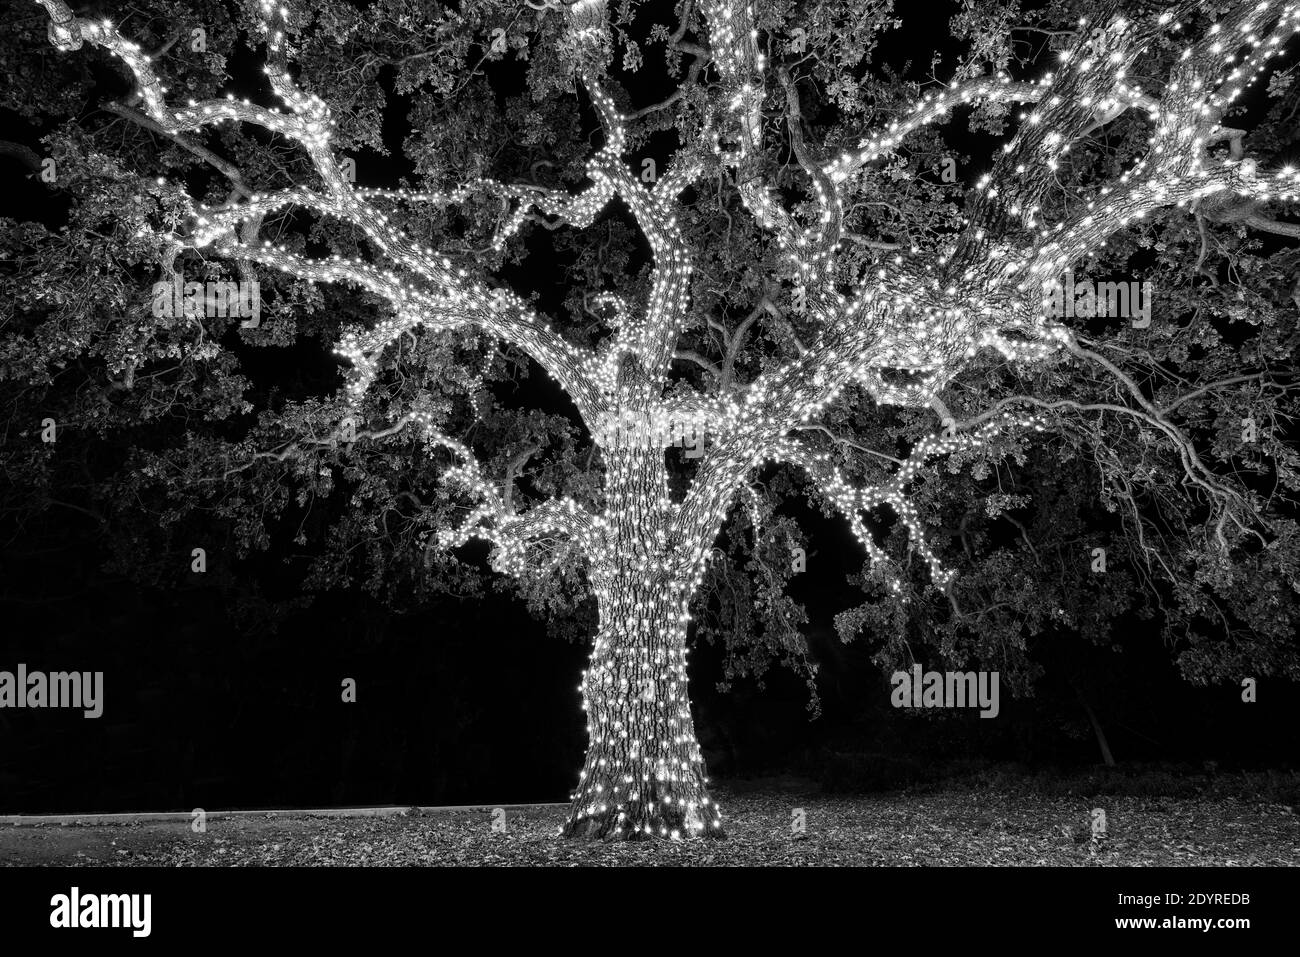 Black and white view of old tree wrapped in decorative holiday christmas lights. Stock Photo